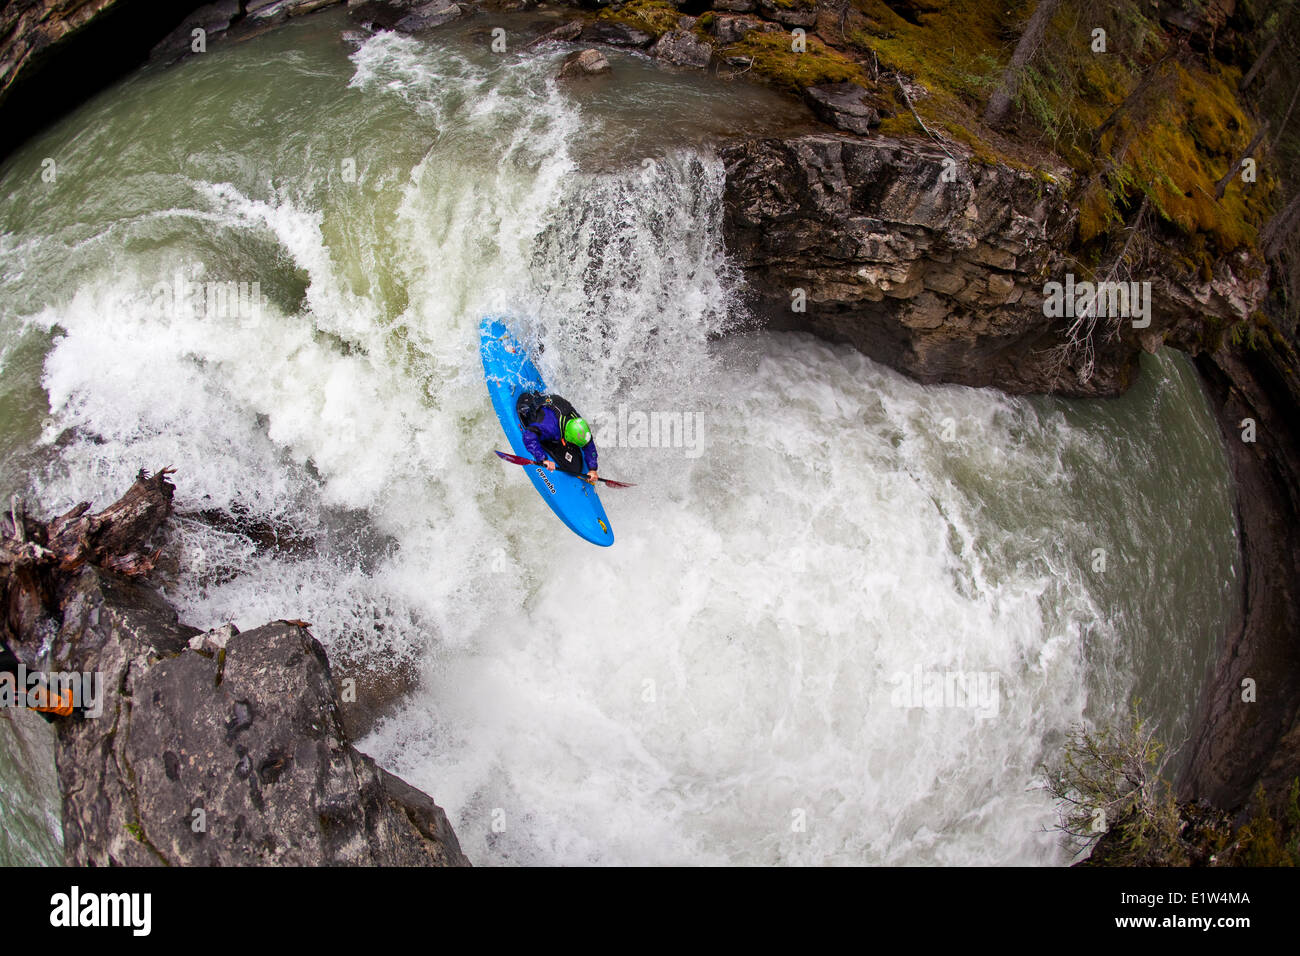 A male kayaker dropping a waterfall on Johnston Canyon, Banff National Park, AB Stock Photo